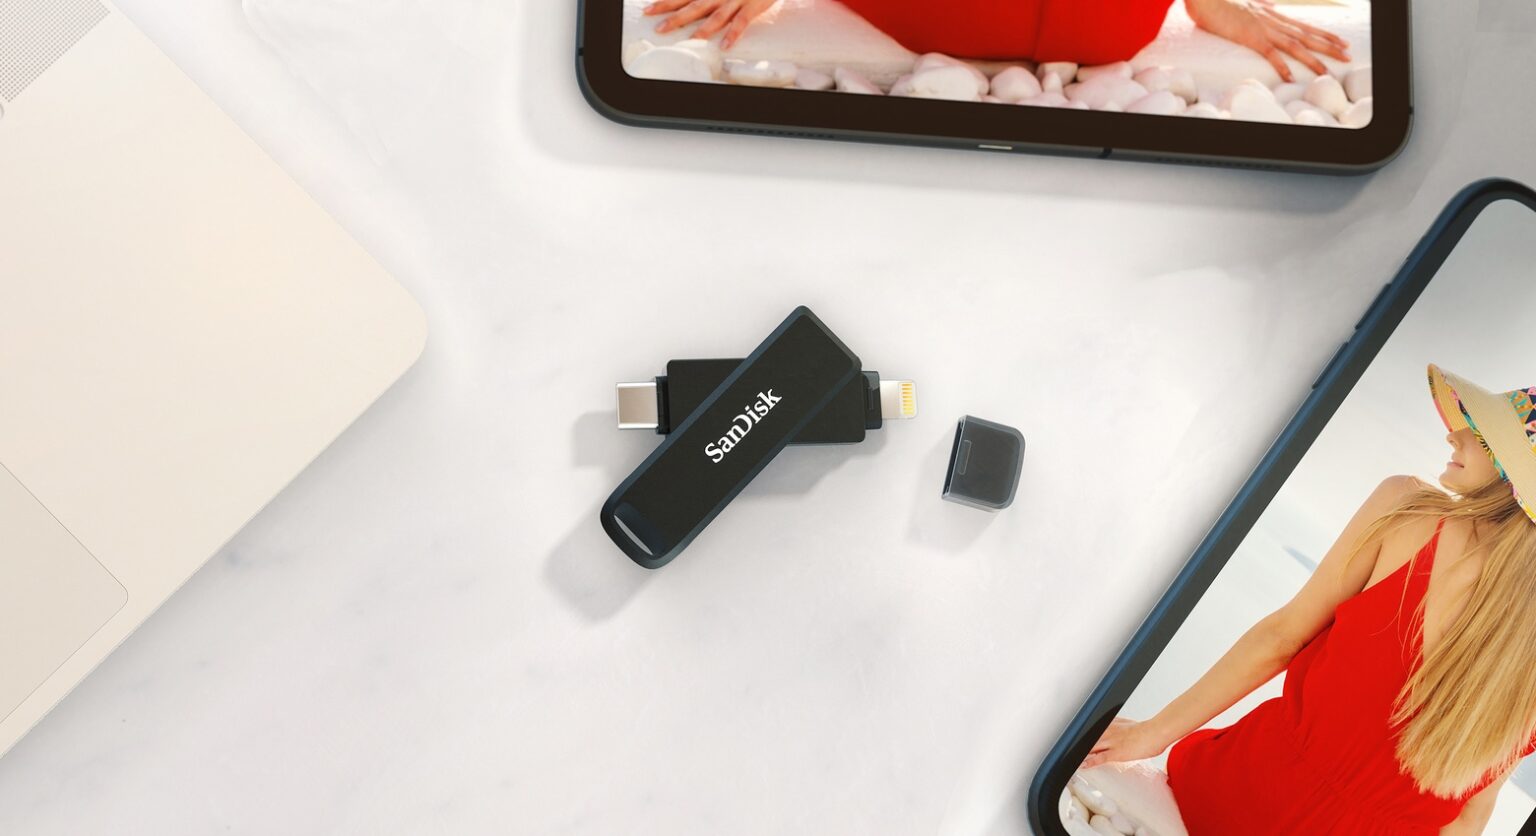 The SanDisk iXpand Flash Drive Luxe debuted on Wednesday